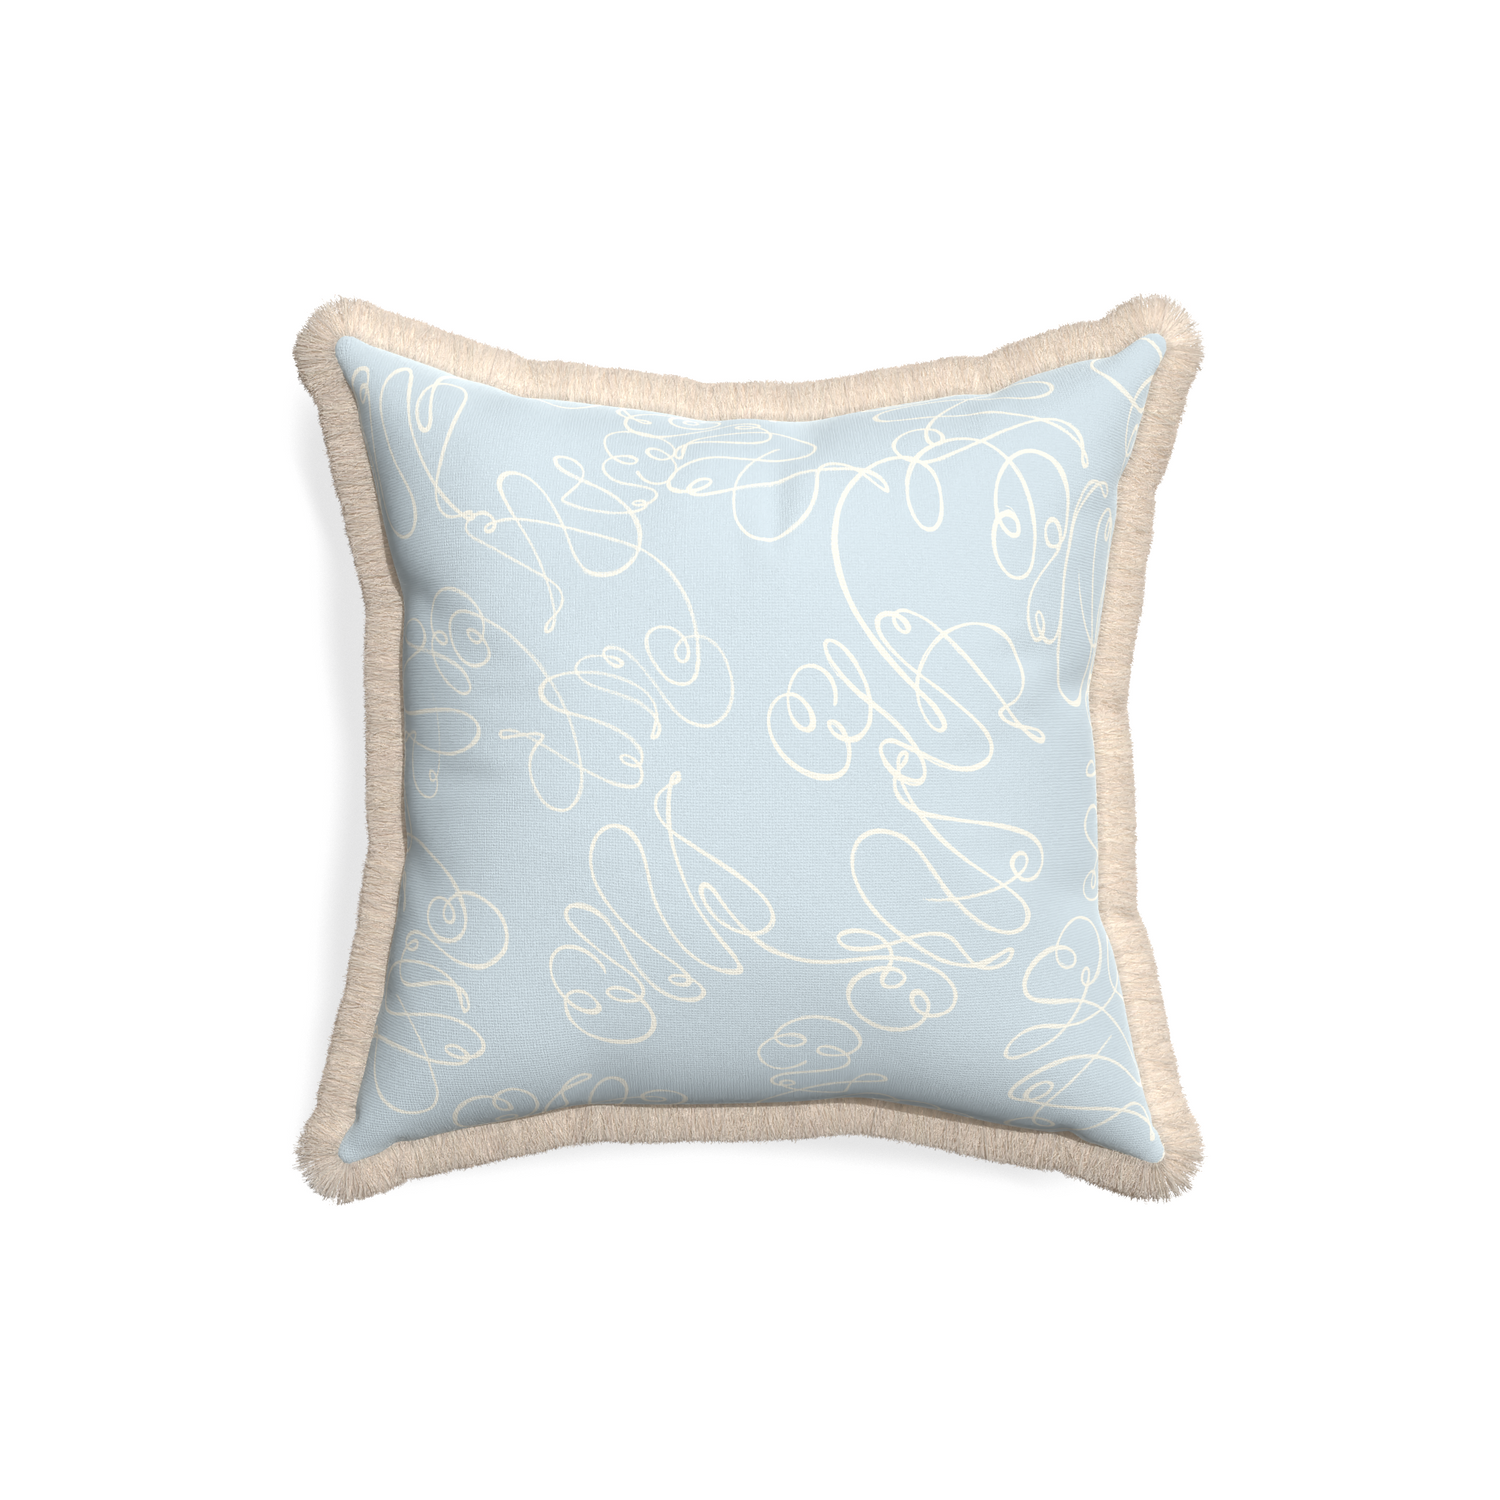 18-square mirabella custom powder blue abstractpillow with cream fringe on white background